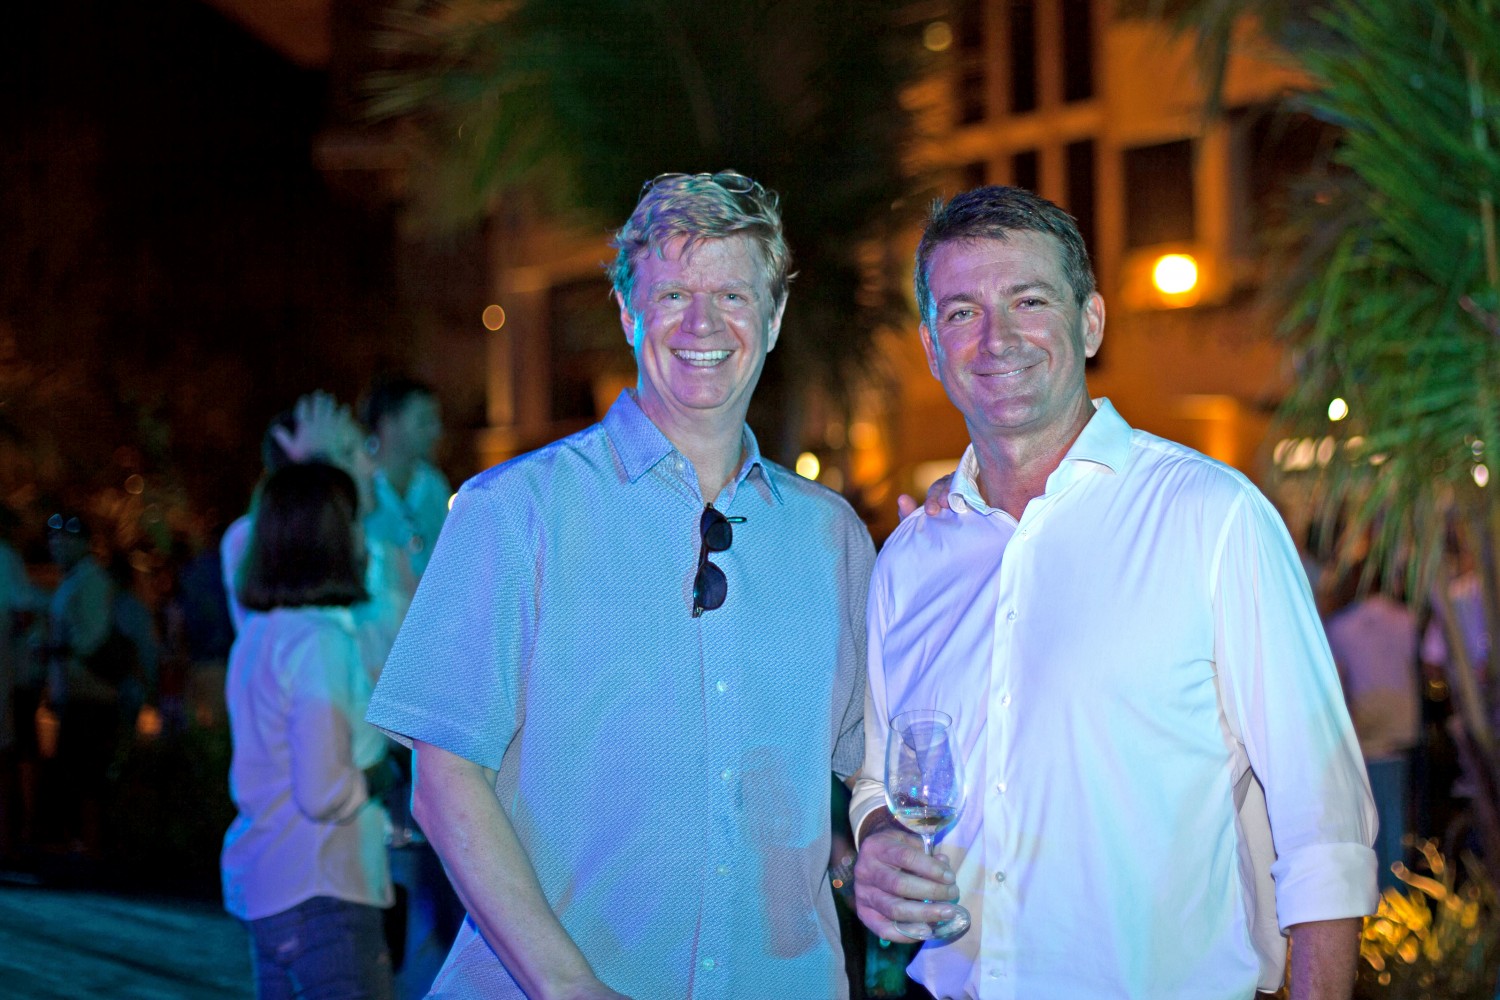 Meeting of minds at the Lee Marine Party at TYS. Jean-Marc Poullet, Chairman of Burgess Asia with Joshua Lee, Founder and Managing Director of Lee Marine